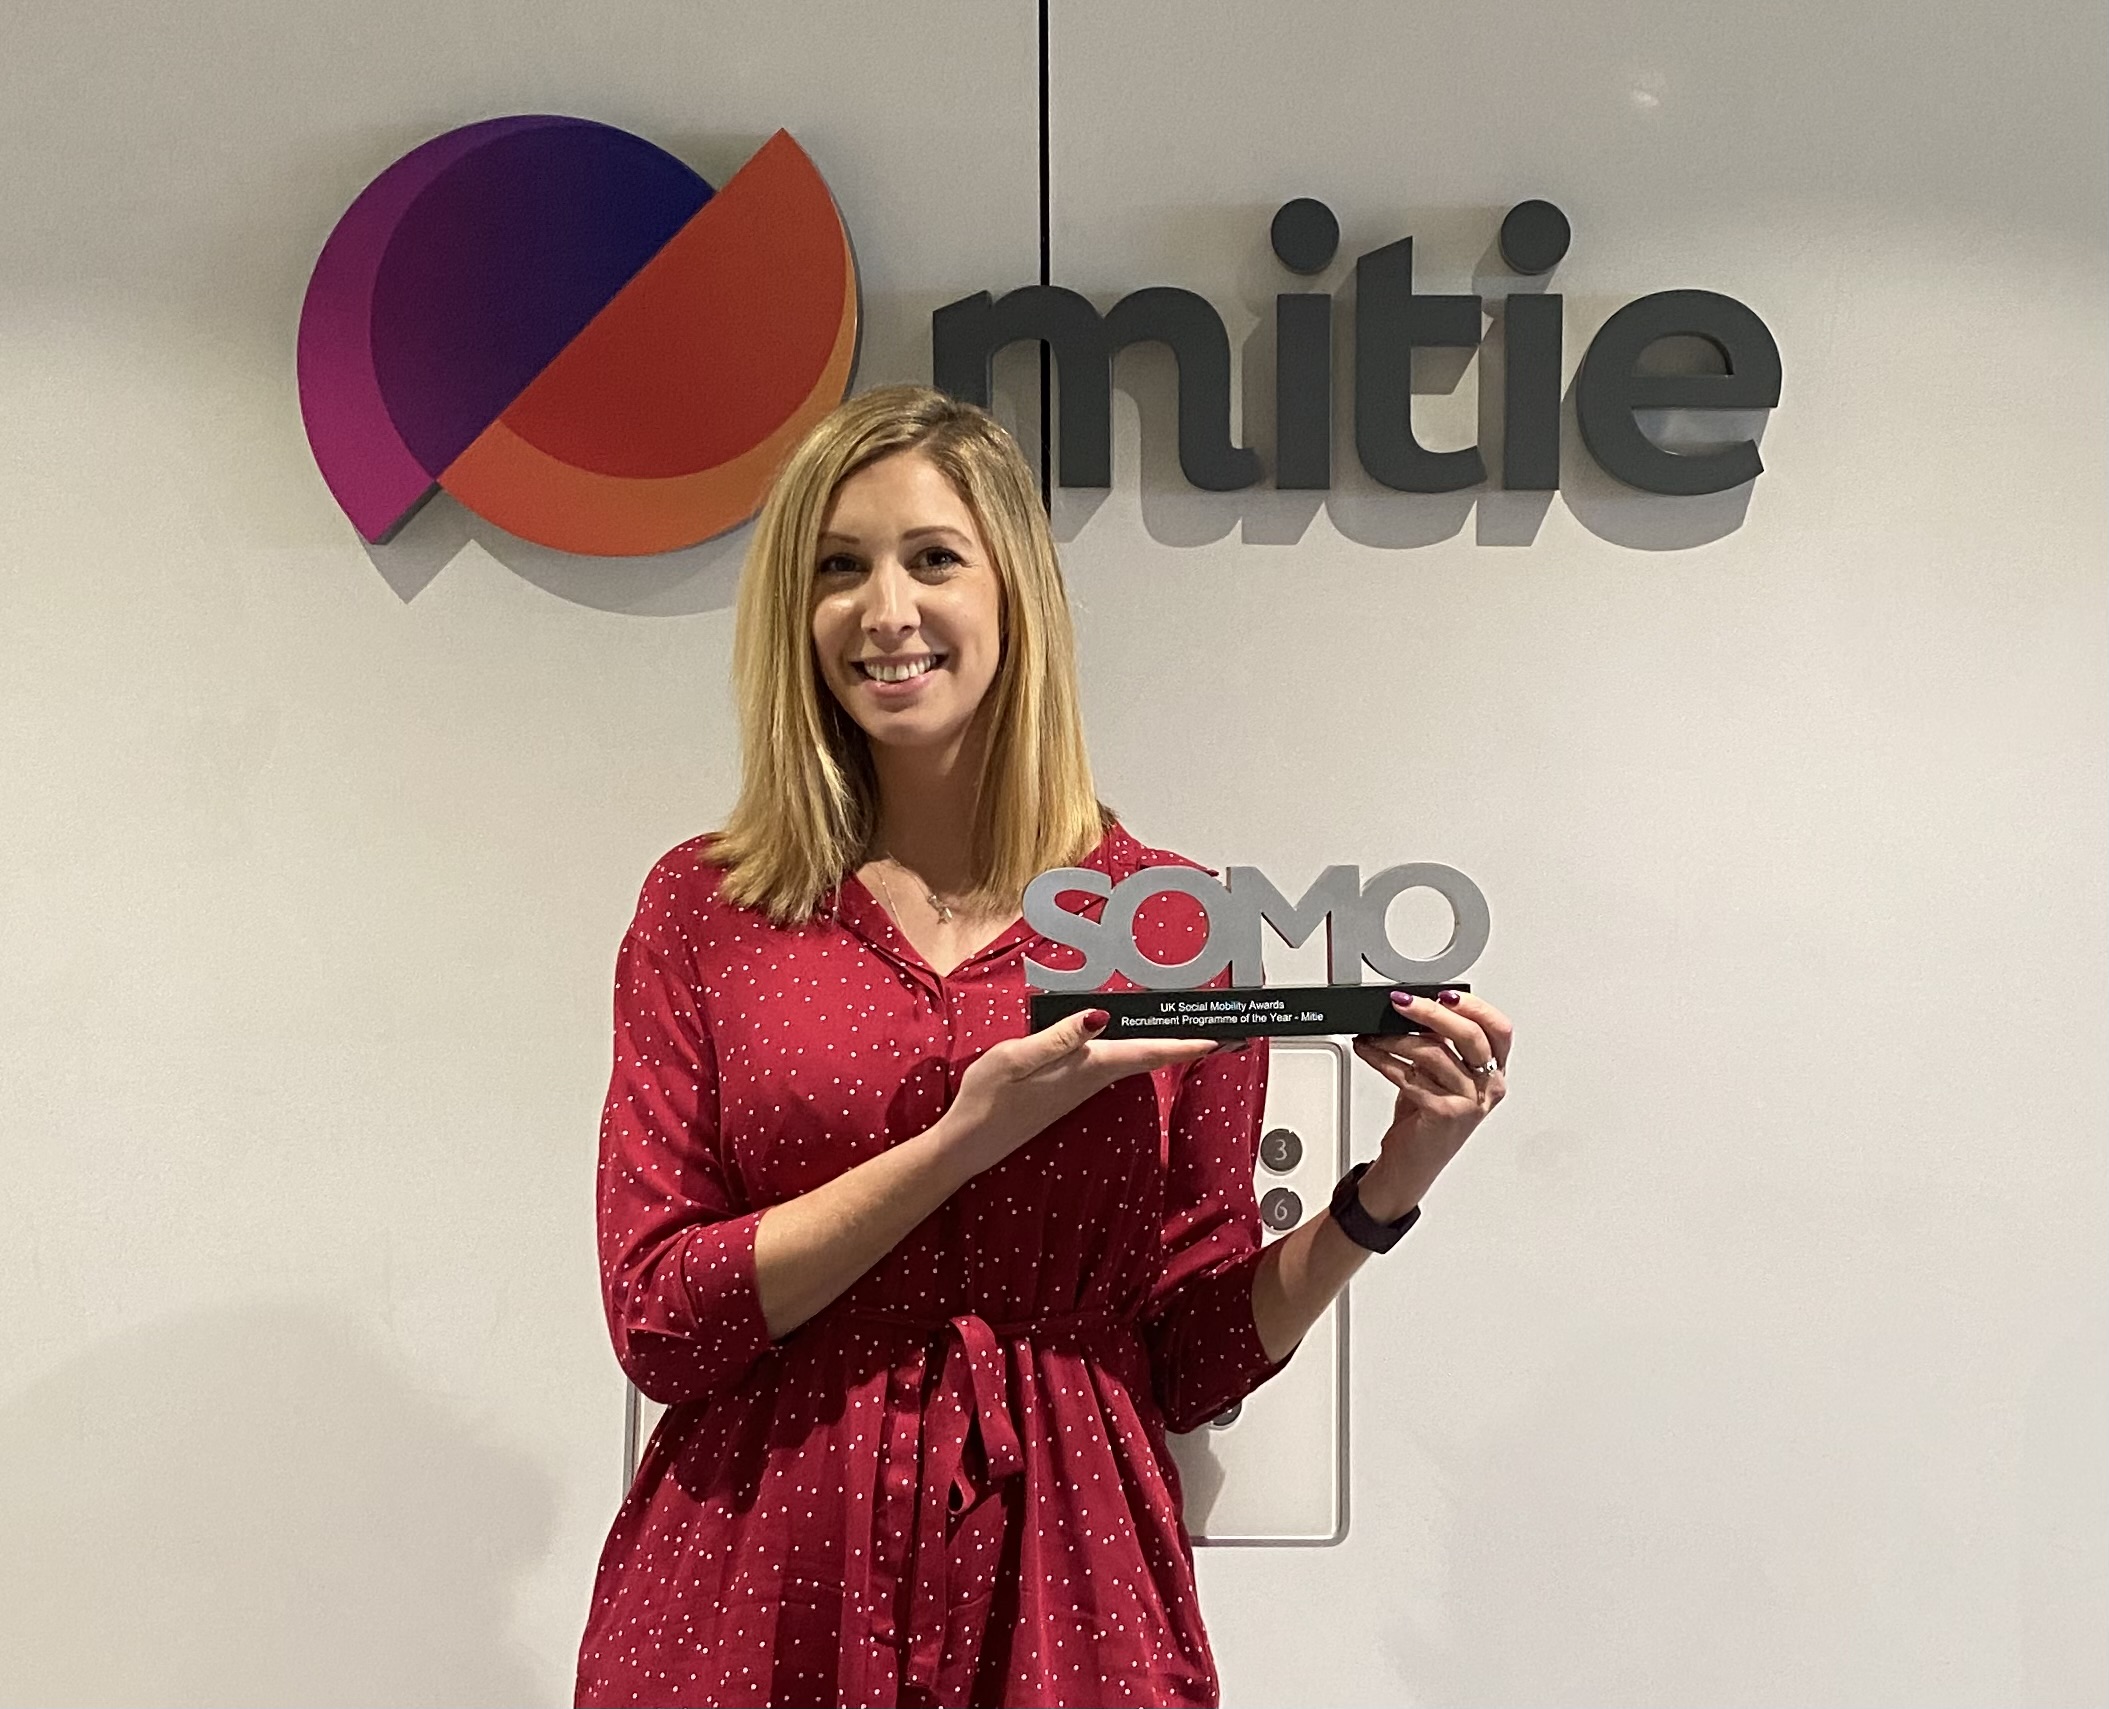 Mitie and their SOMOs trophy